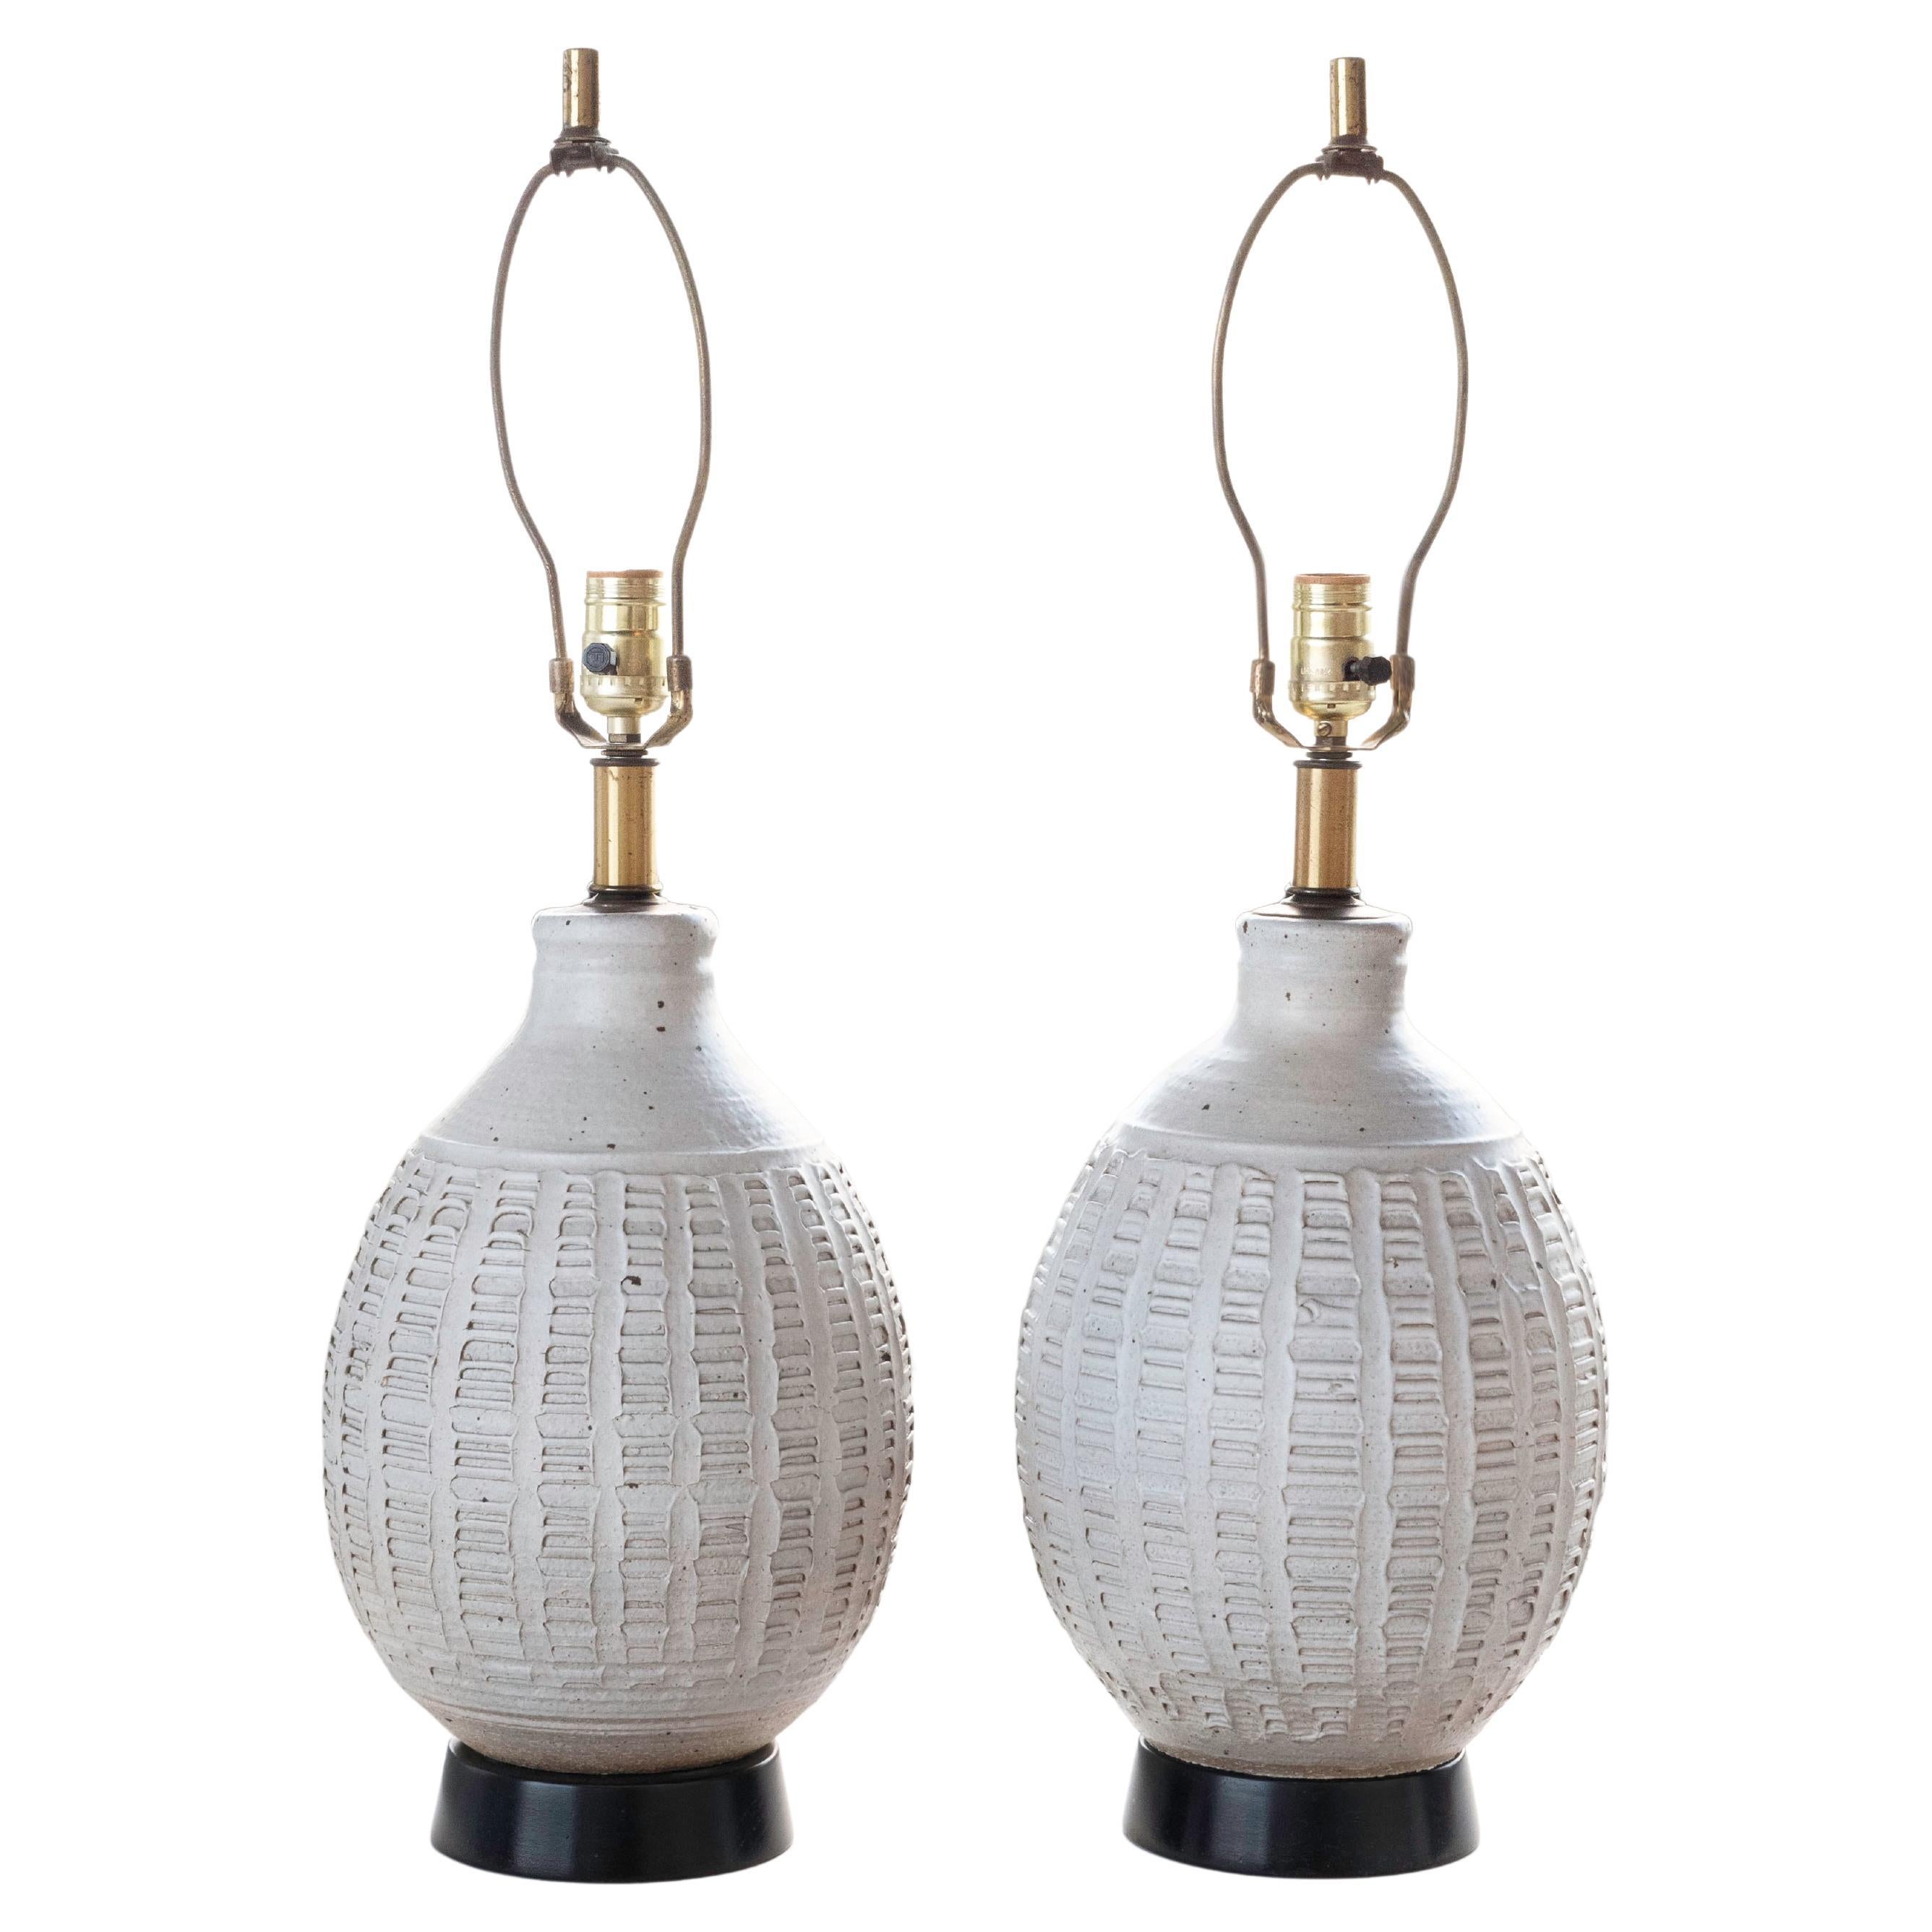 Bob Kinzie Pair of White Glazed Table Lamps for Affiliated Craftsmen, 1960s For Sale